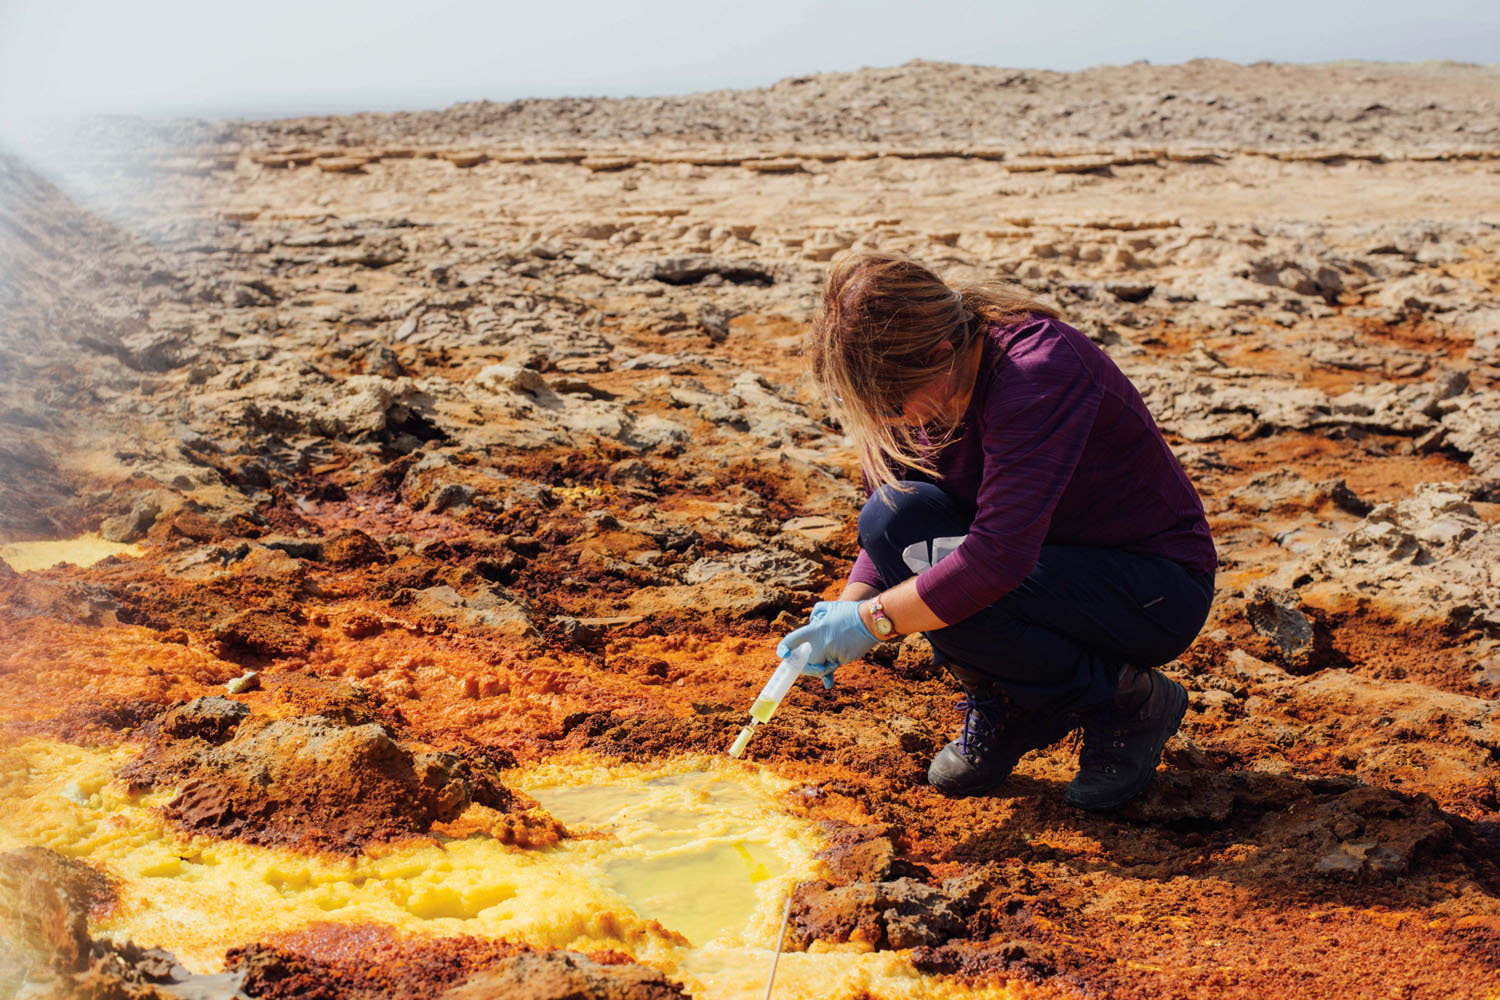 Dr. Karen Olsson-Francis collects a sample from a sulfur pool. These samples will be brought back to her lab in the United Kingdom, where her team will look for biosignatures that may provide clues about the extreme limits of life here on Earth as an analogue for extraterrestrial sites. Photograph by Alex Pritz.